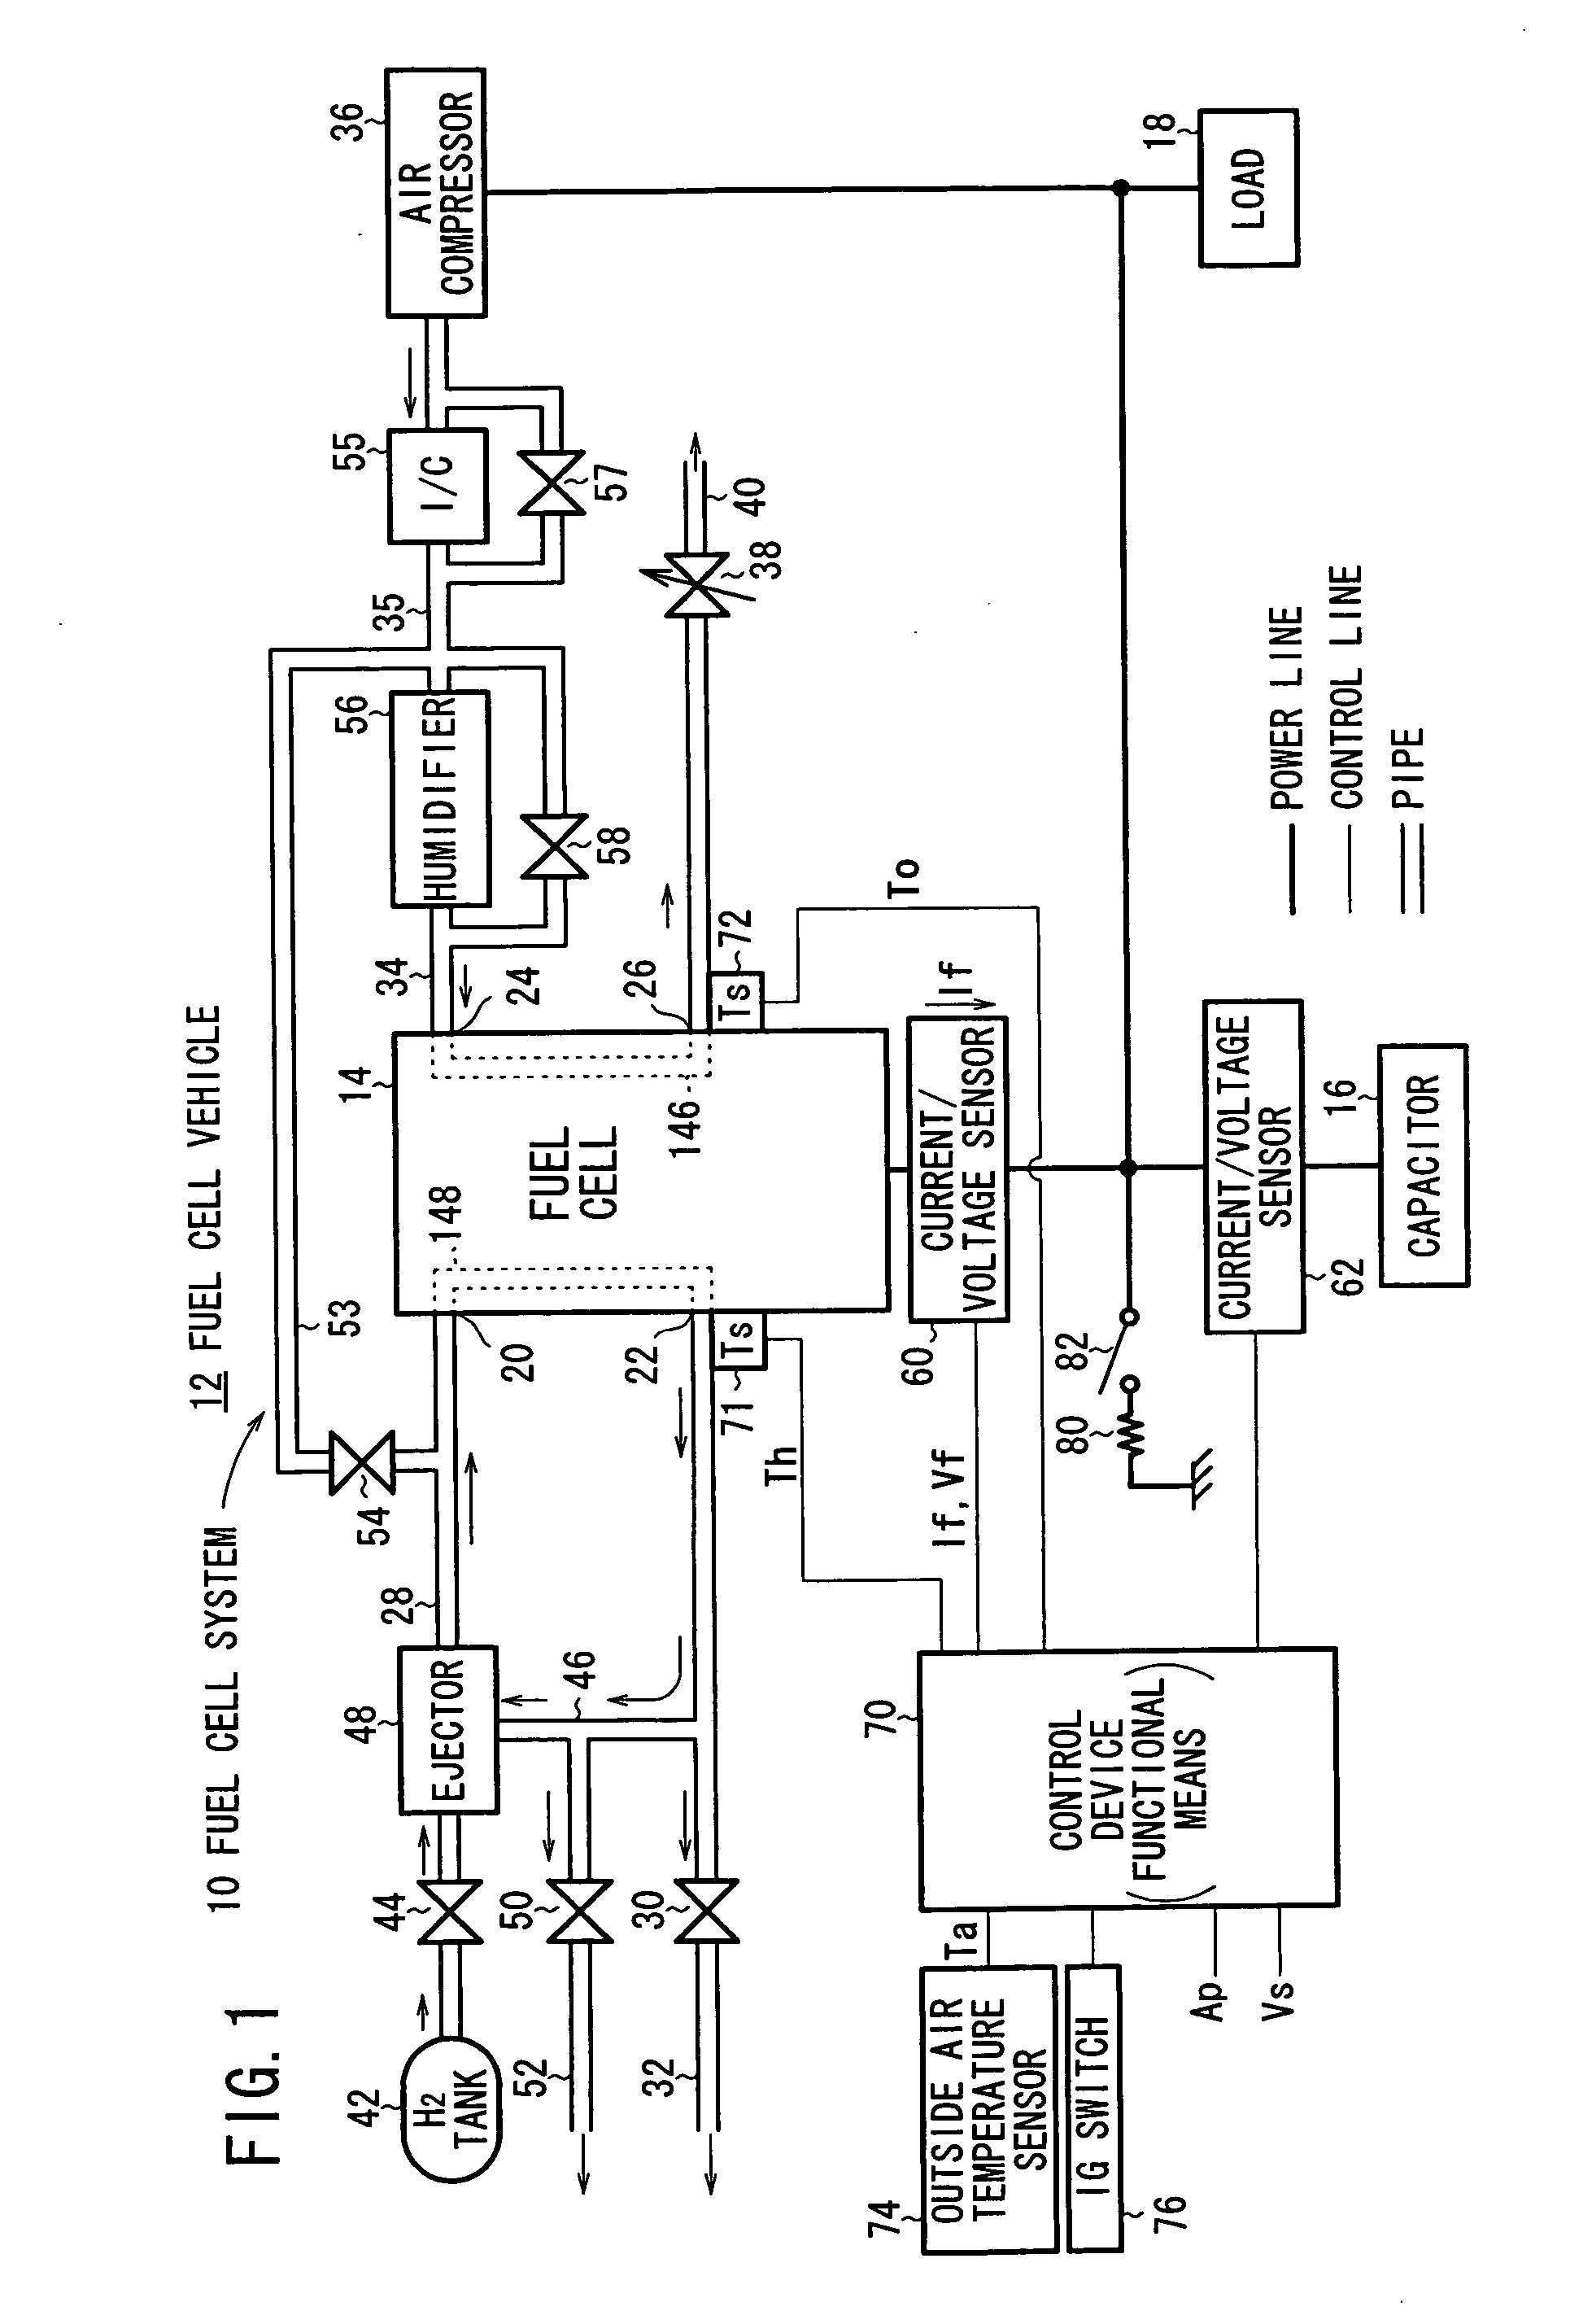 Fuel cell system and scavenging method for use in a fuel cell system